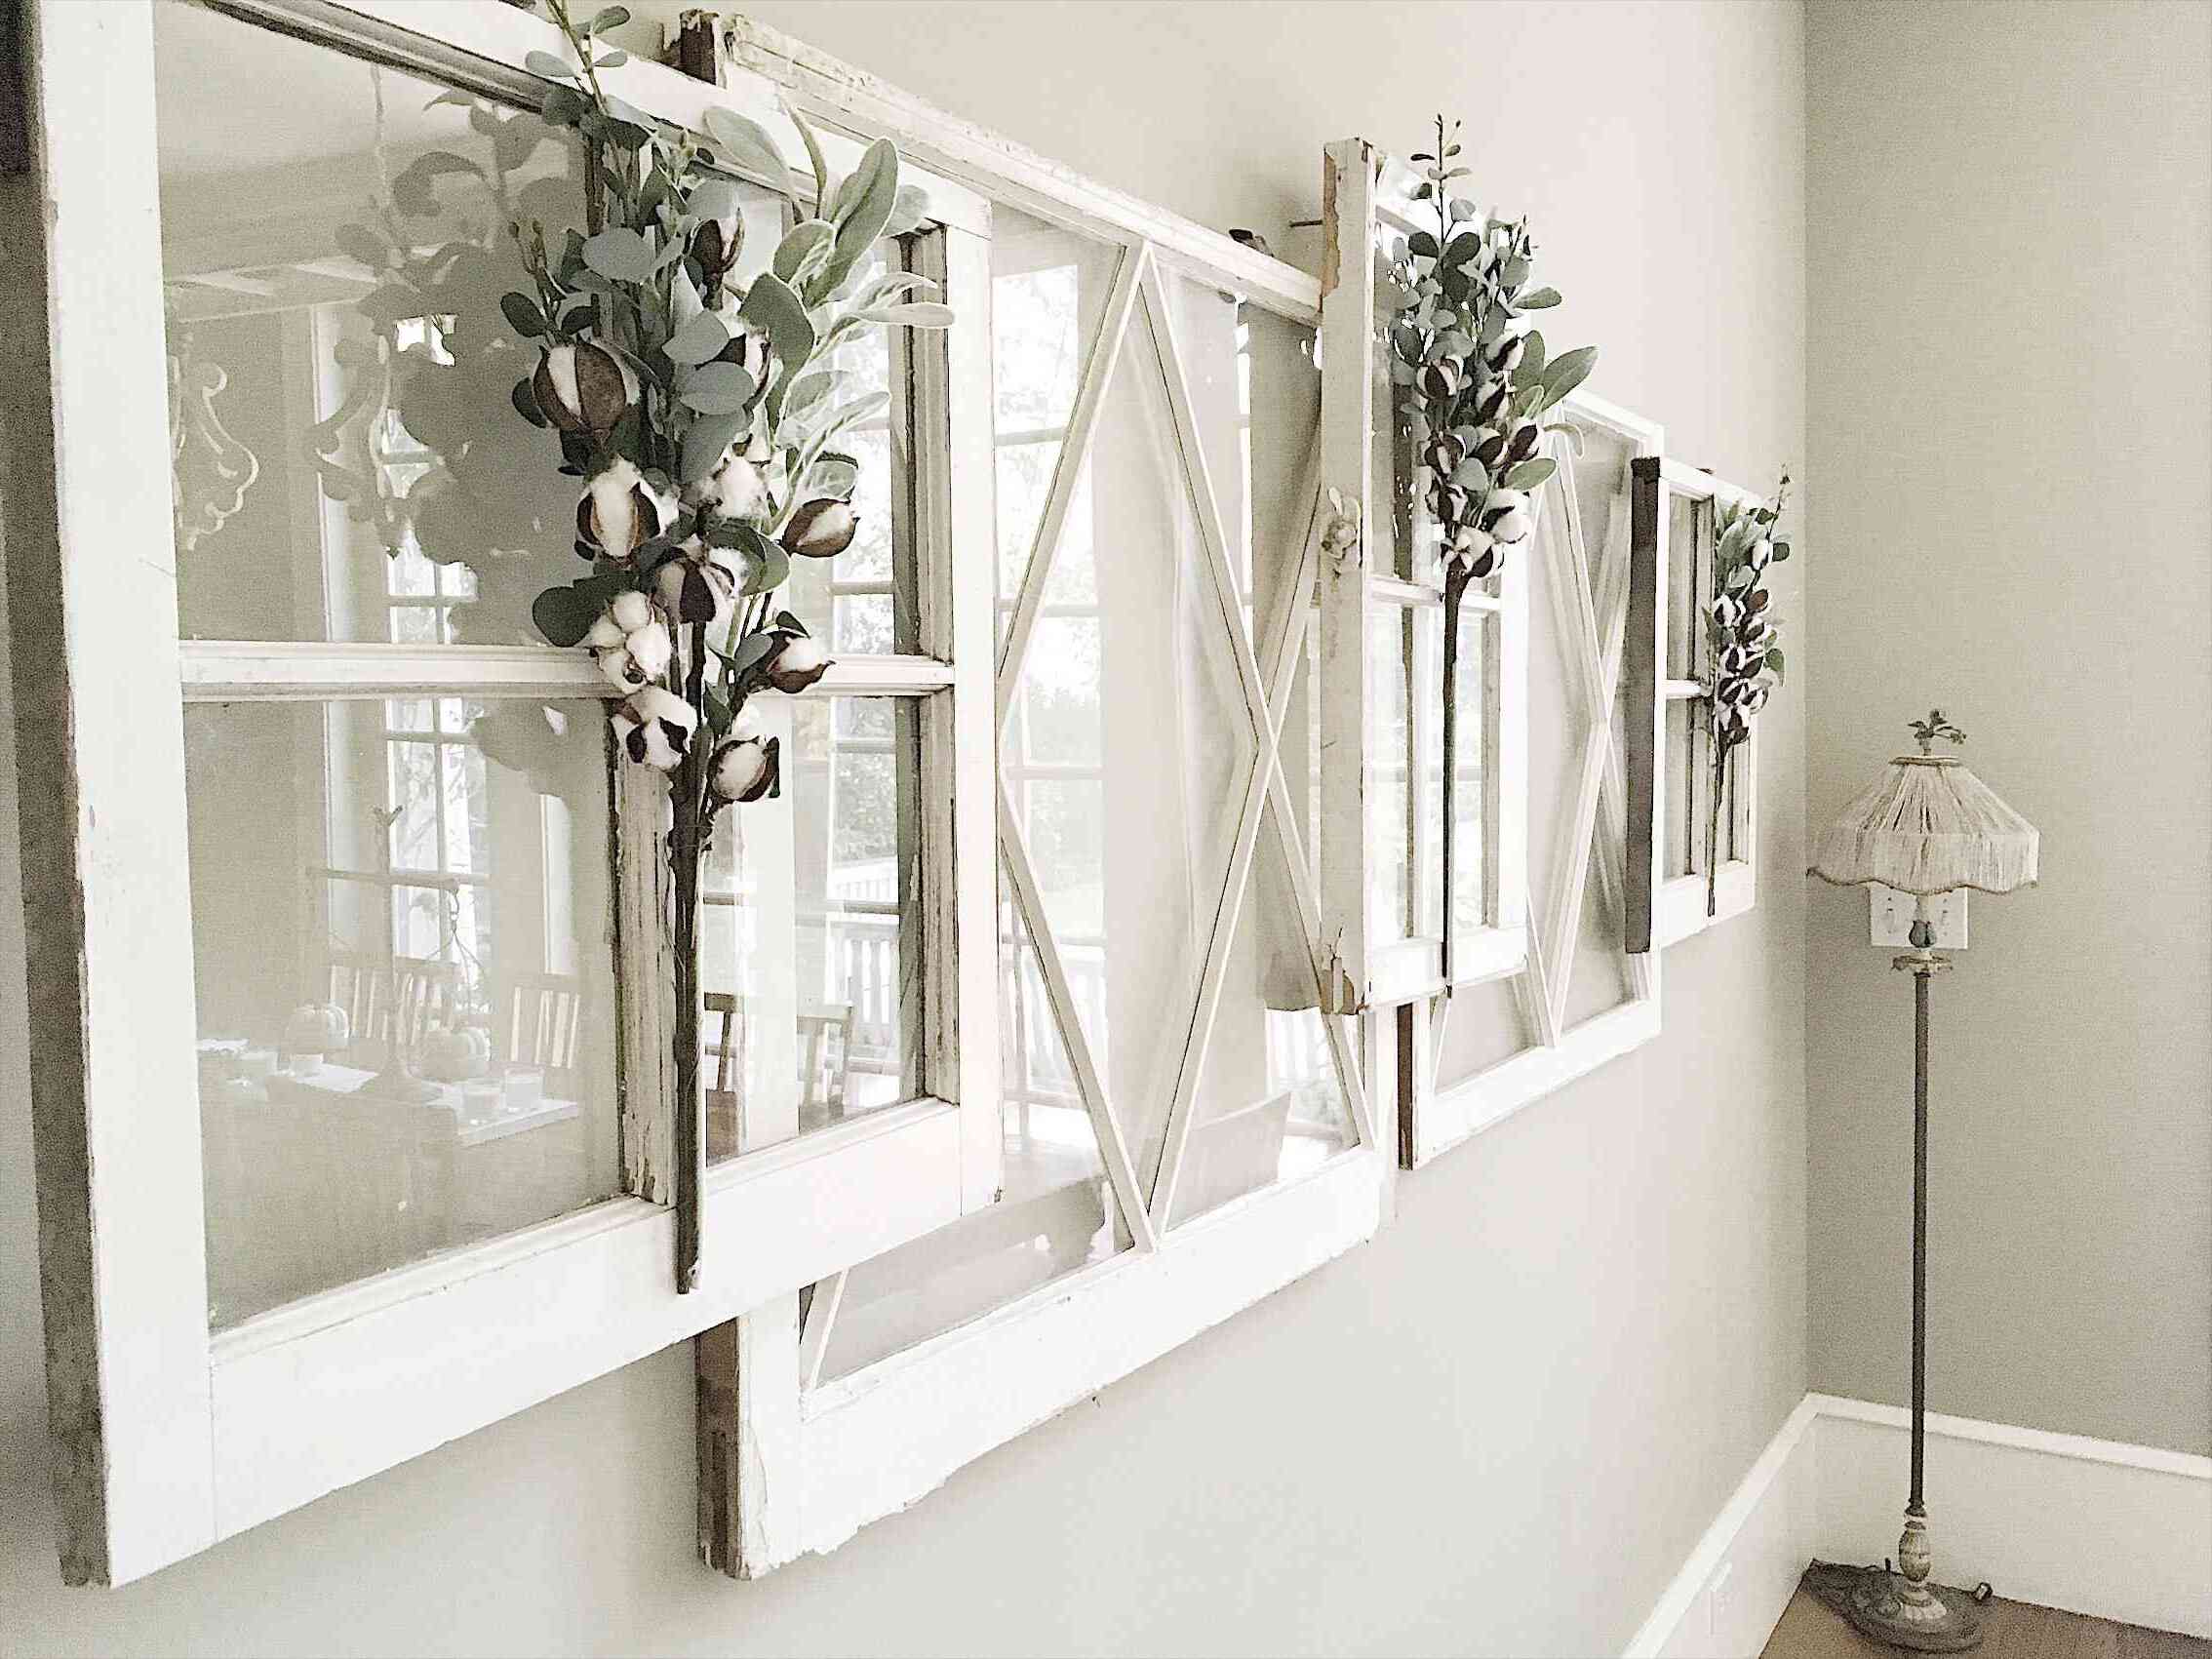 DIY Window Frame: Transform Your Space With This Easy Craft Project